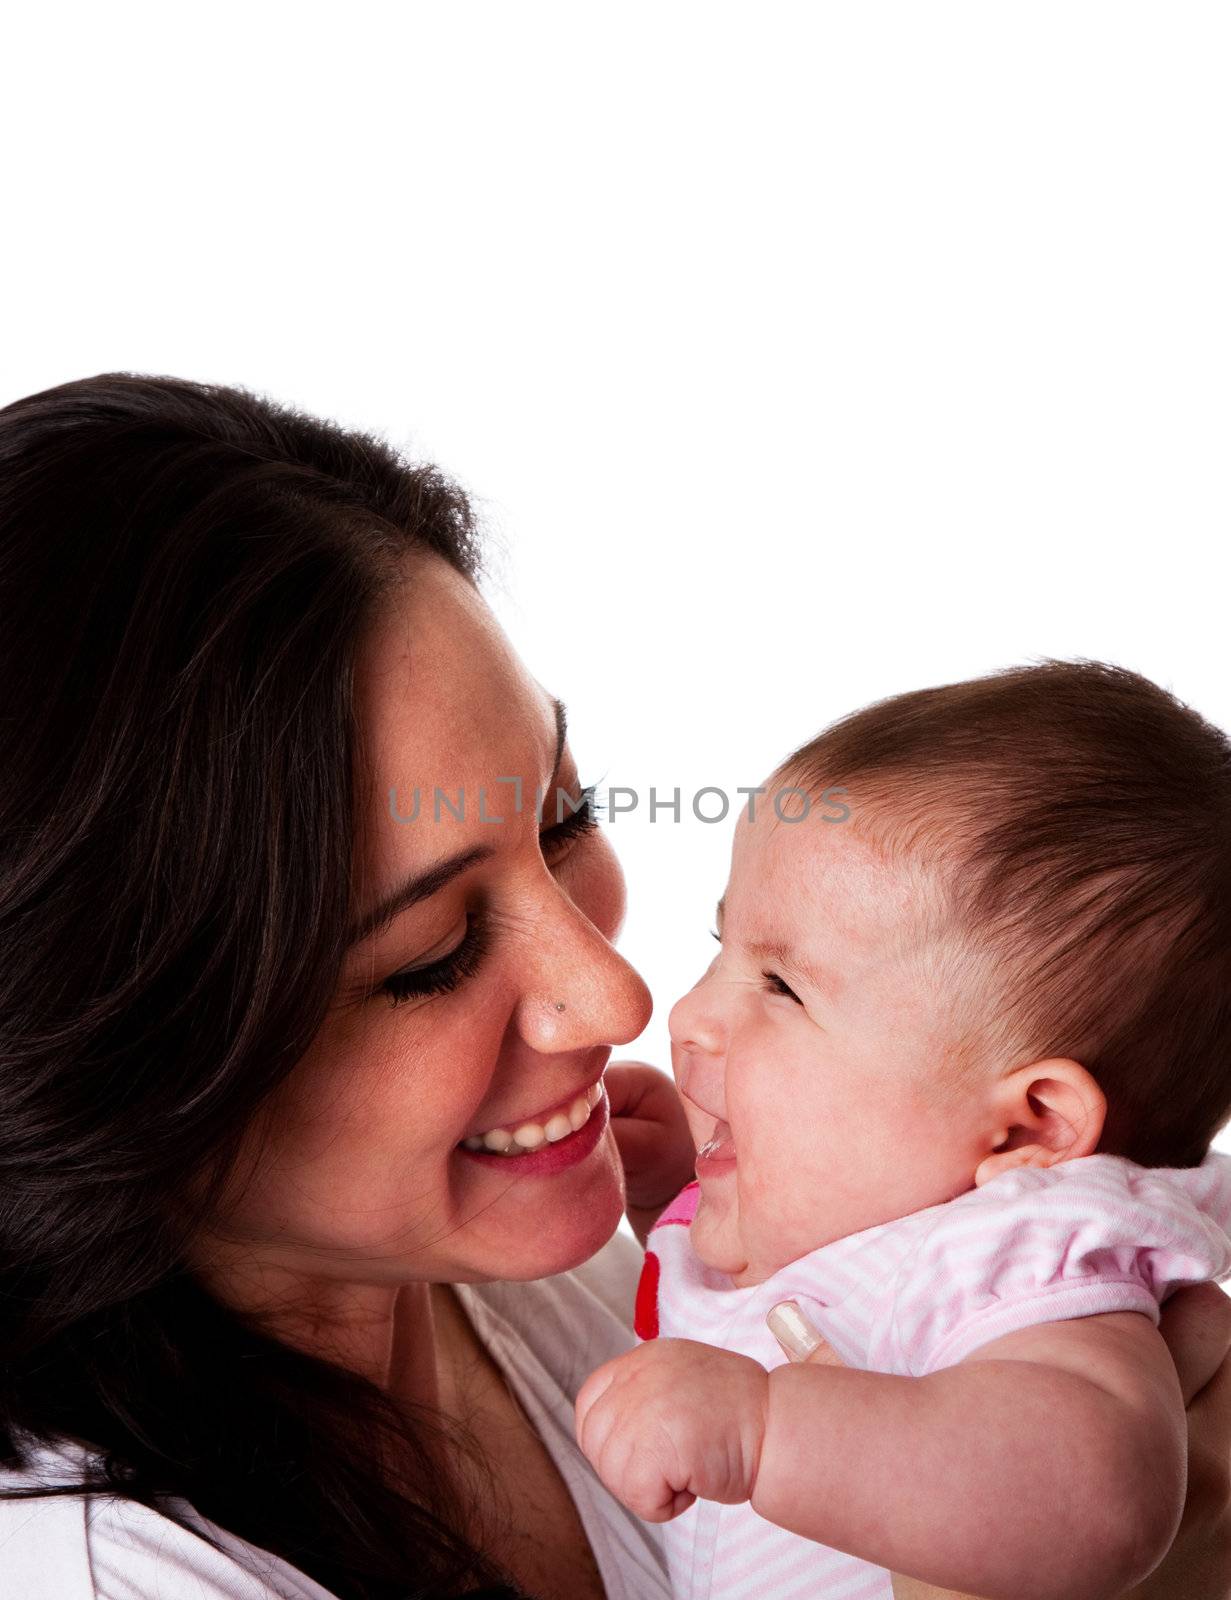 Faces of beautiful family couple of mother and daughter baby girl looking at eachother having fun and laughing, isolated.